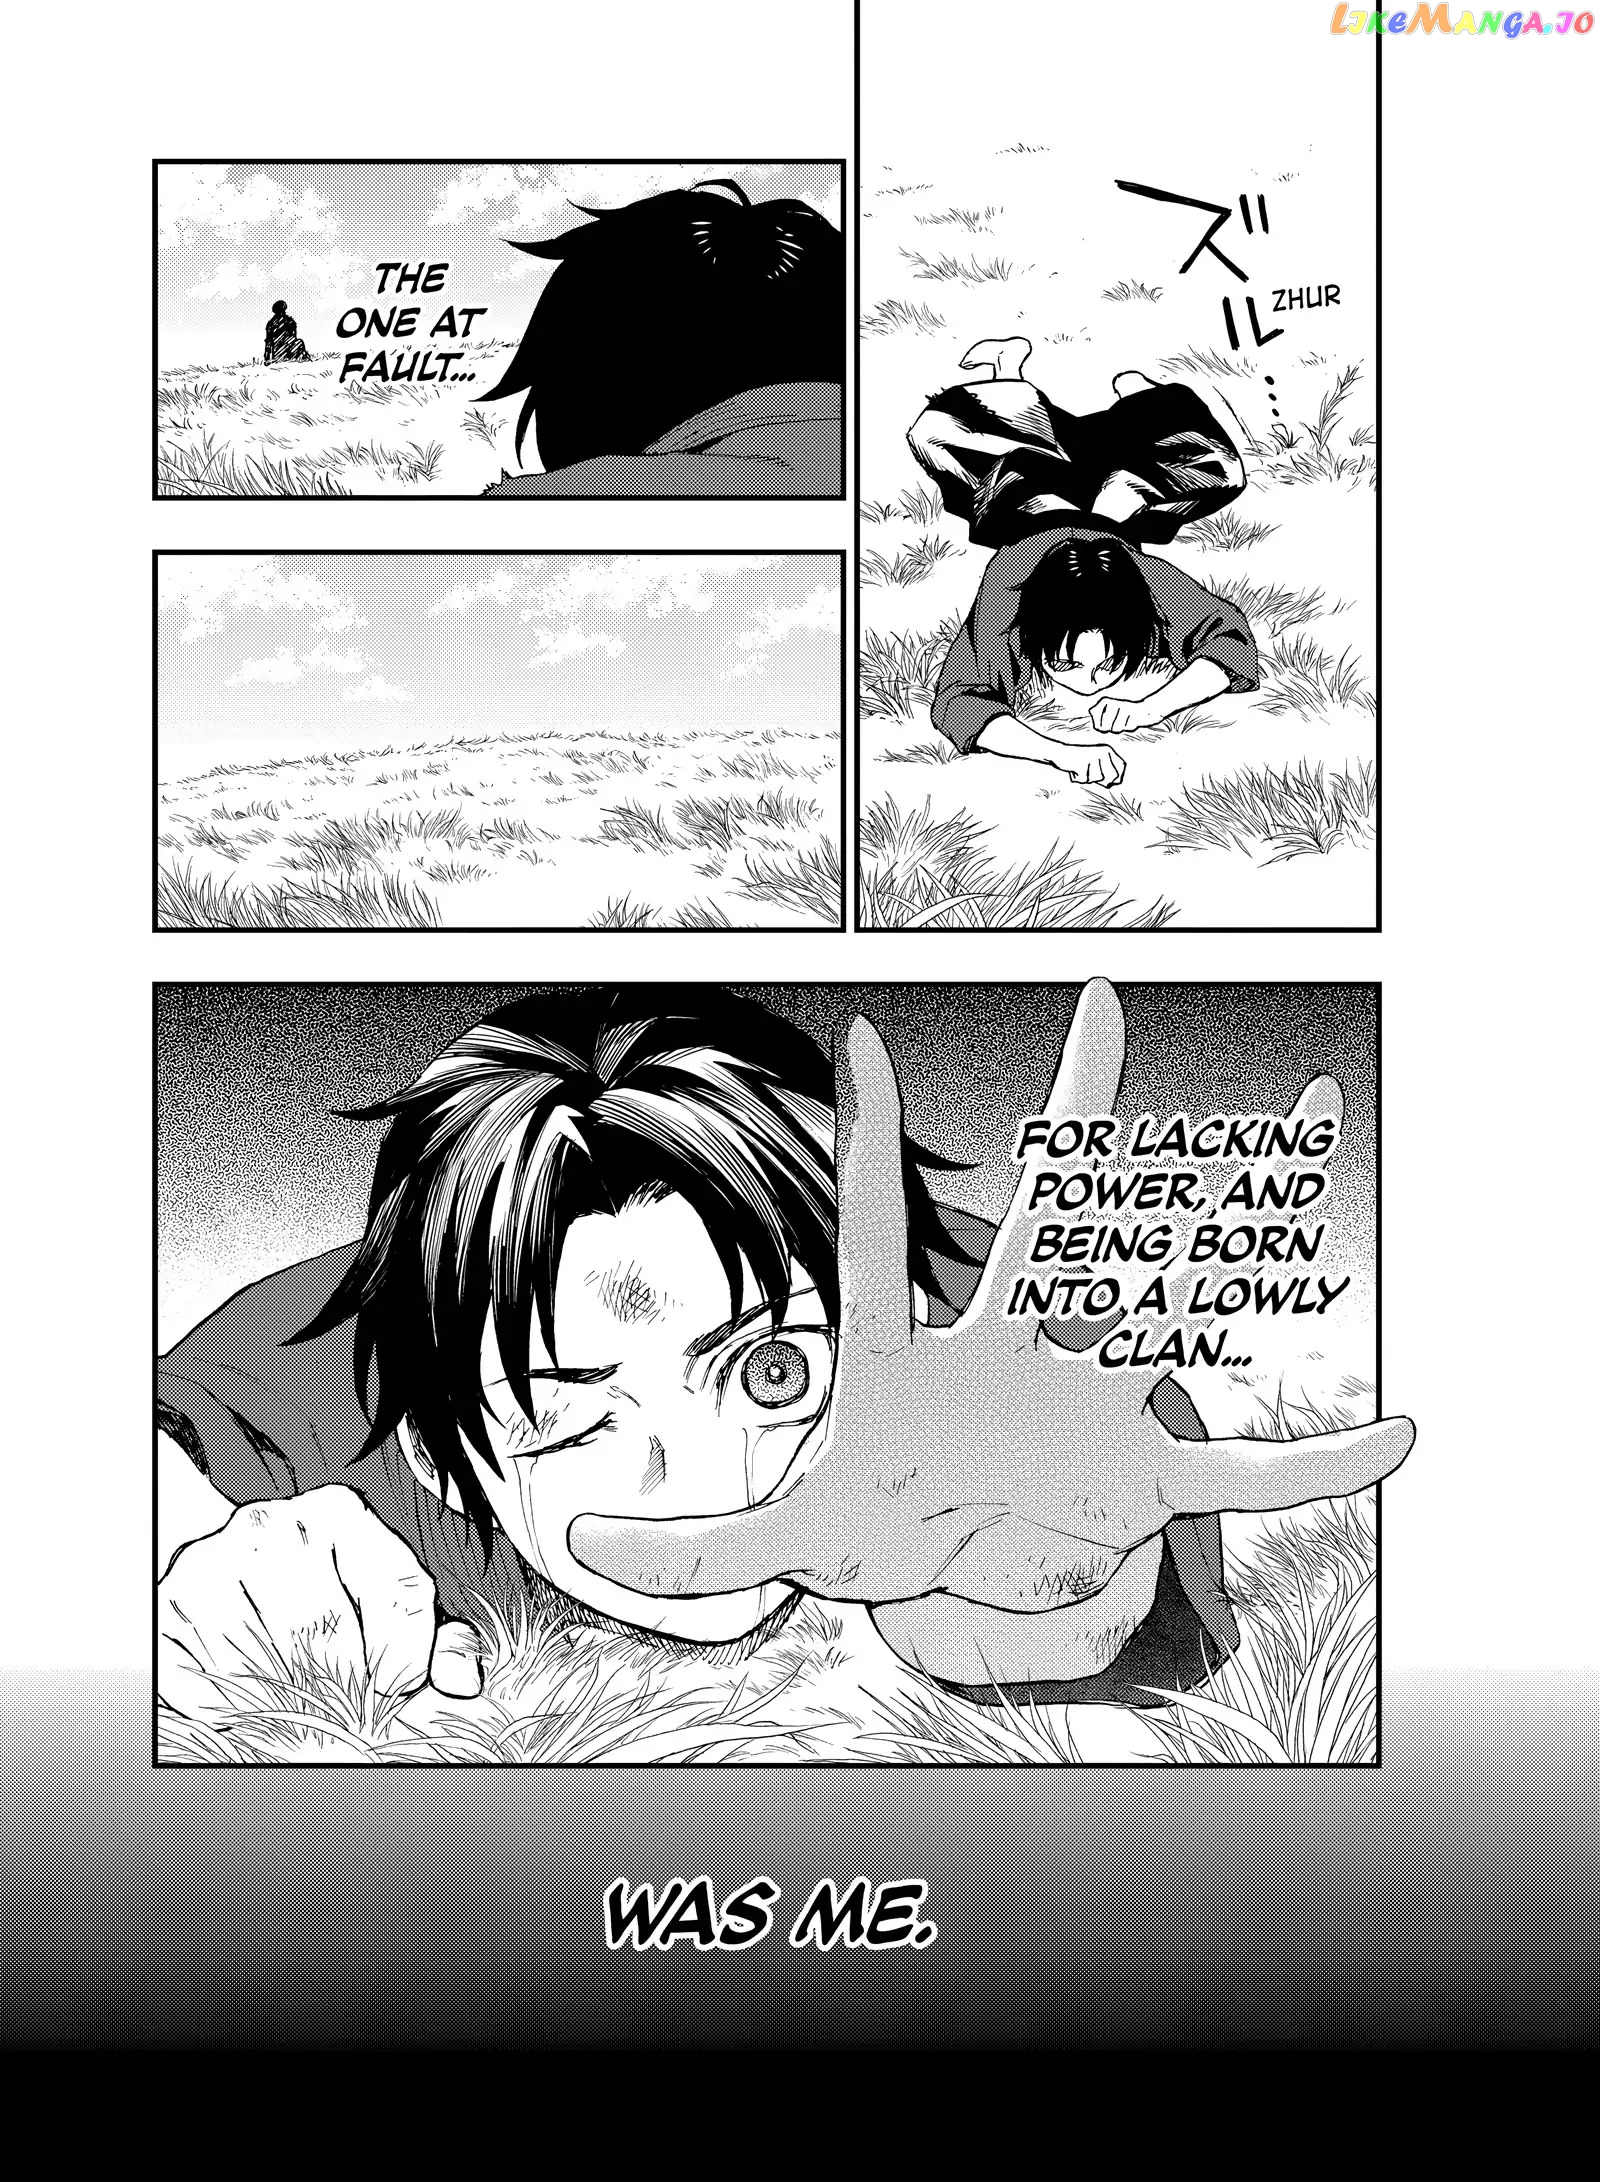 Seraph of the End: Guren Ichinose: Catastrophe at Sixteen Chapter 2 - page 7